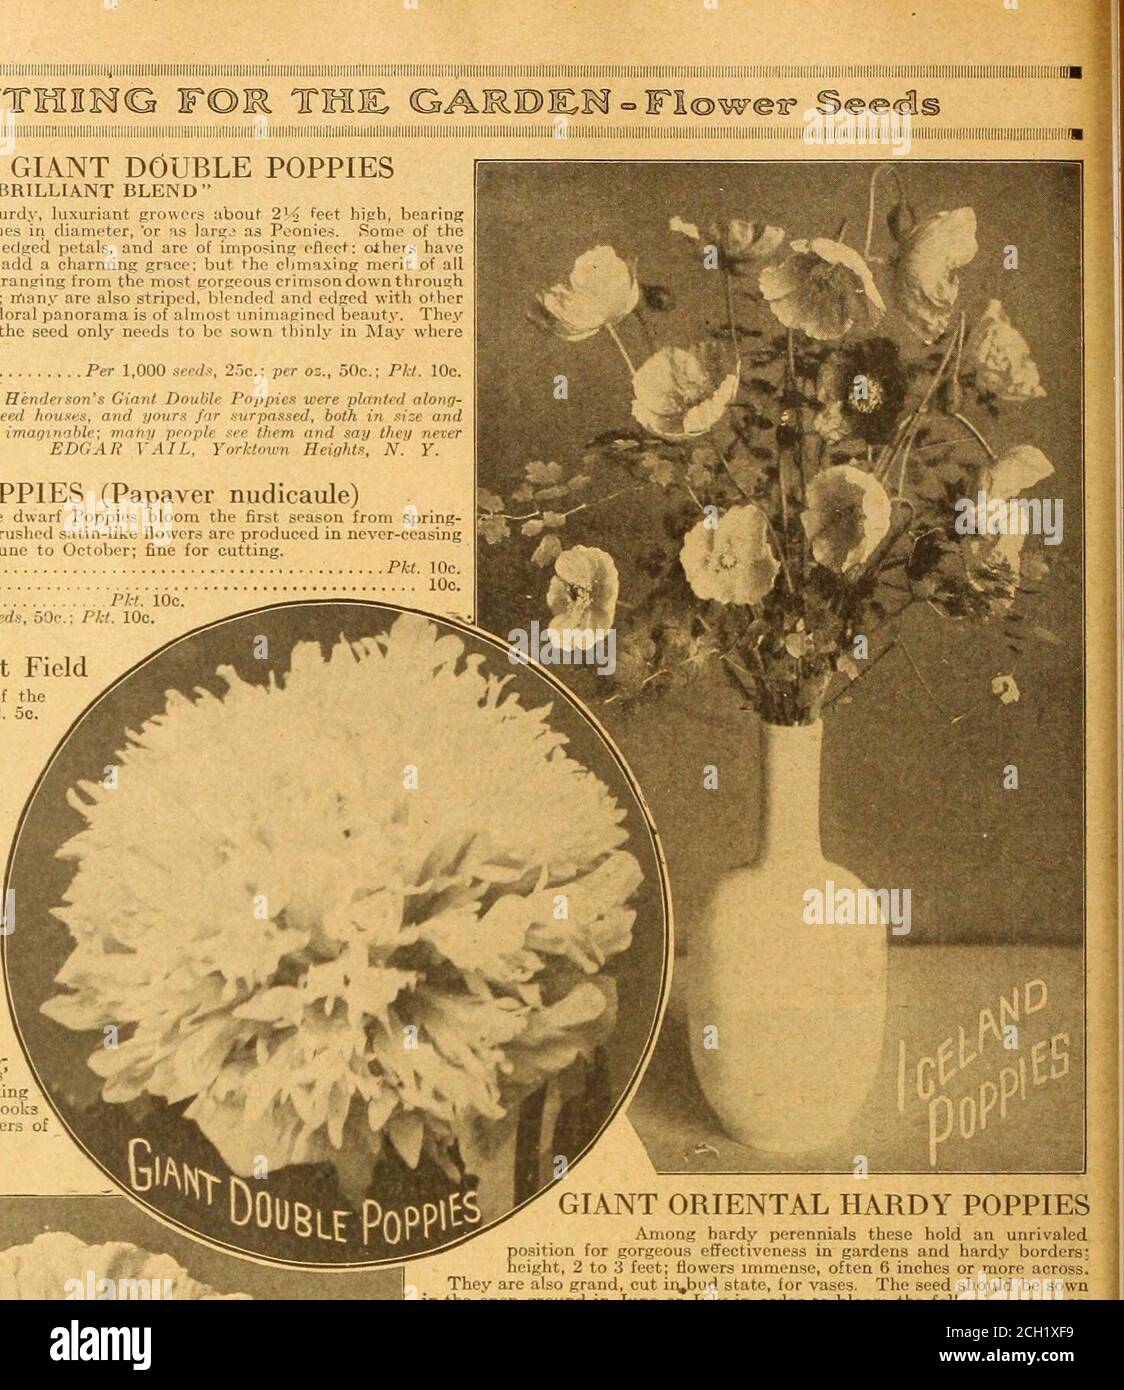 . Everything for the garden : 1920 . caule) Although hardy perennials, these dwarf Poppies bloom the first season from spring-sown seed. The fragrant, elegant, crushed satin-like flowers are produced in never-ceasingsuccession from the beginning of June to October; fine for cutting. 3472 Scarlet Pkt. 10c. 3474 White 10c. 347G Yellow Pkl. 10c. 34S0 Mixed Colors Per 1,00 Ic ; Pkt. 10c. POPPY, English Scarlet Field 3465 The famous Scarlet Poppy of theEnglish fields. Per oz., 25c Pkt. 5c. POPPY, Glaucum 3407 (The Scarlet Tulip Poppy.)Beautiful large tulip-shaped flowersof brilliant scarlet. 1 foot Stock Photo